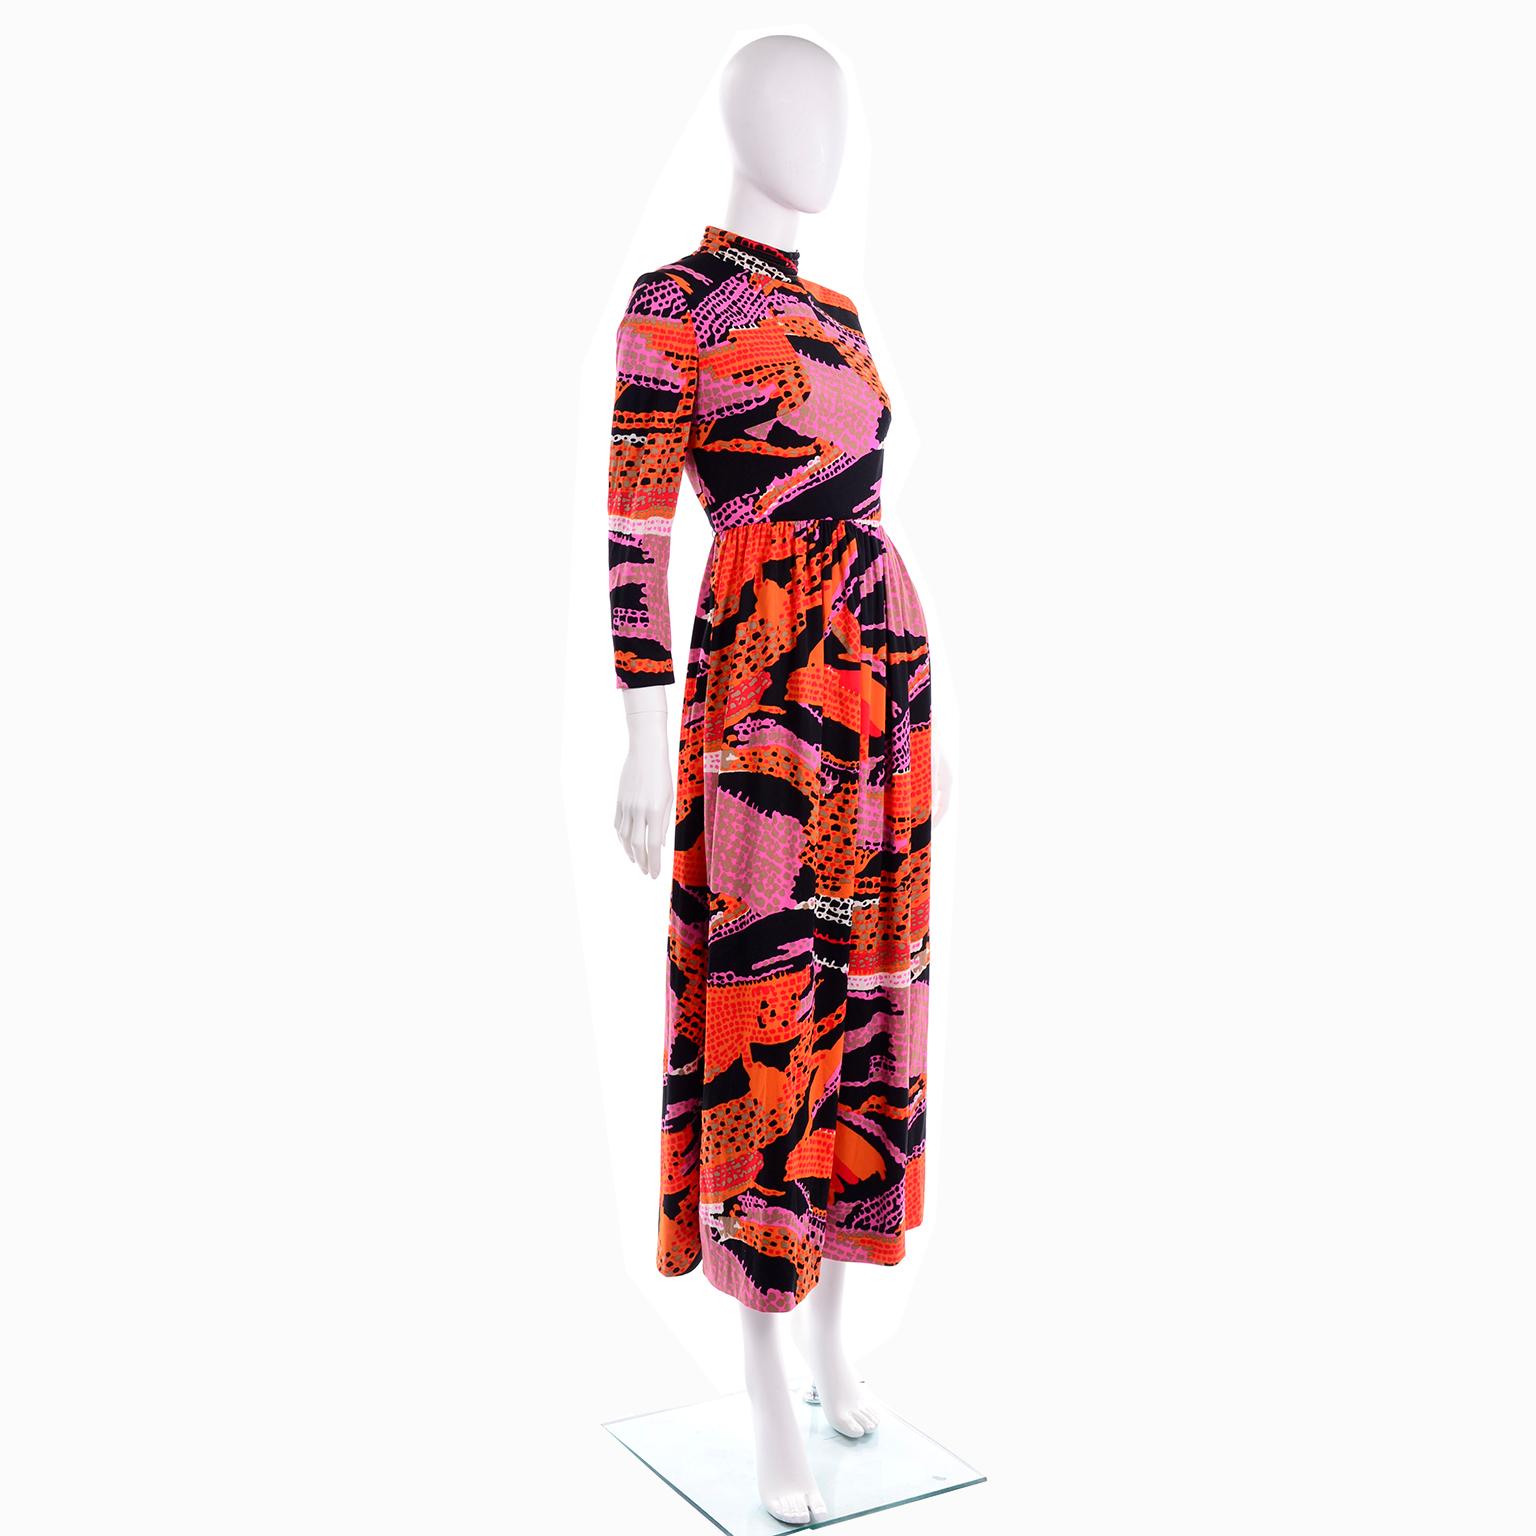 Women's 1970s Dynasty Vintage Maxi Dress in Mod Red Orange Pink & Black Abstract Print 